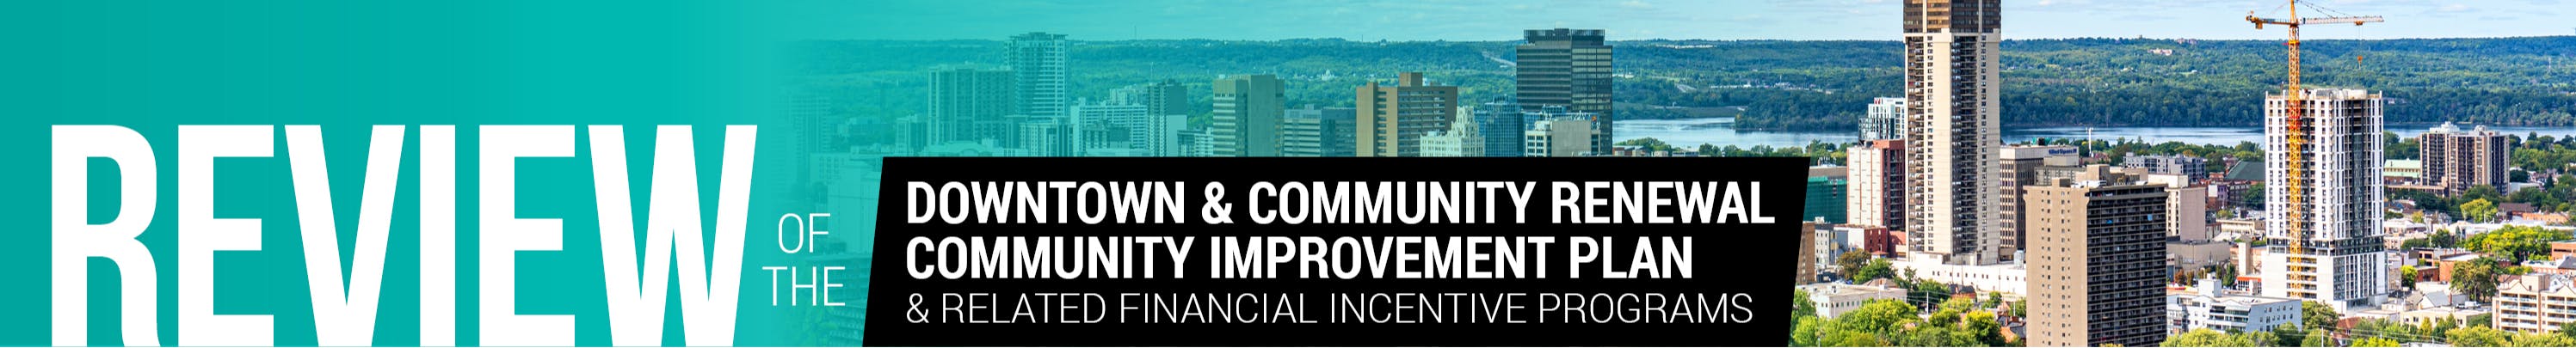 Review of the Downtown & Community Renewal Community Improvement Plan & Related Financial Incentive Programs